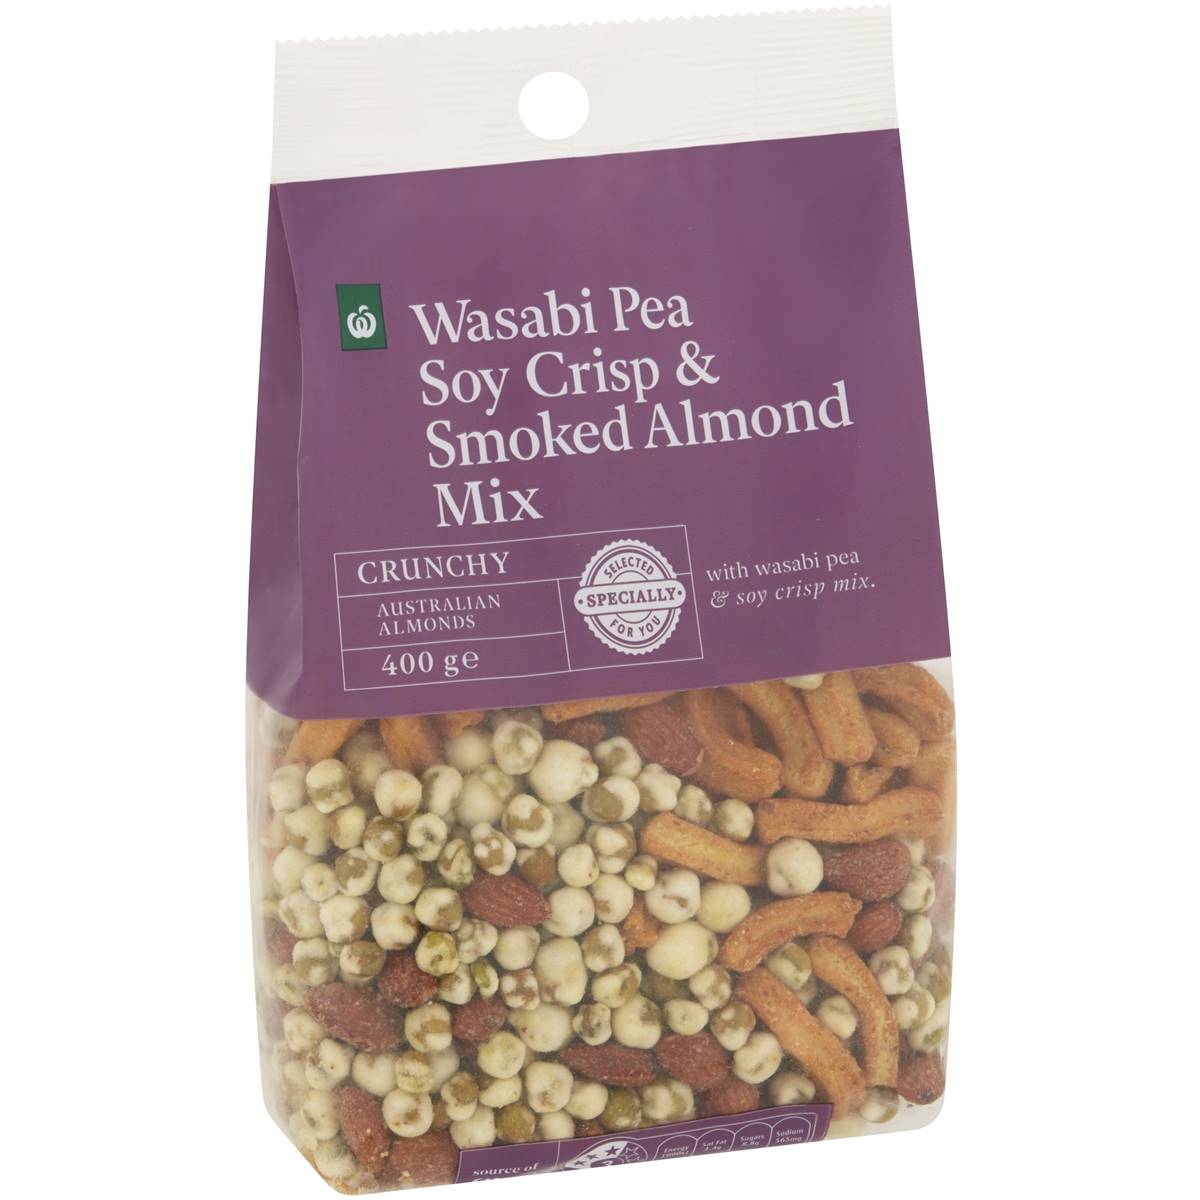 Calories in Woolworths Wasabi Pea Soy Crisp & Smoked Almond Mix